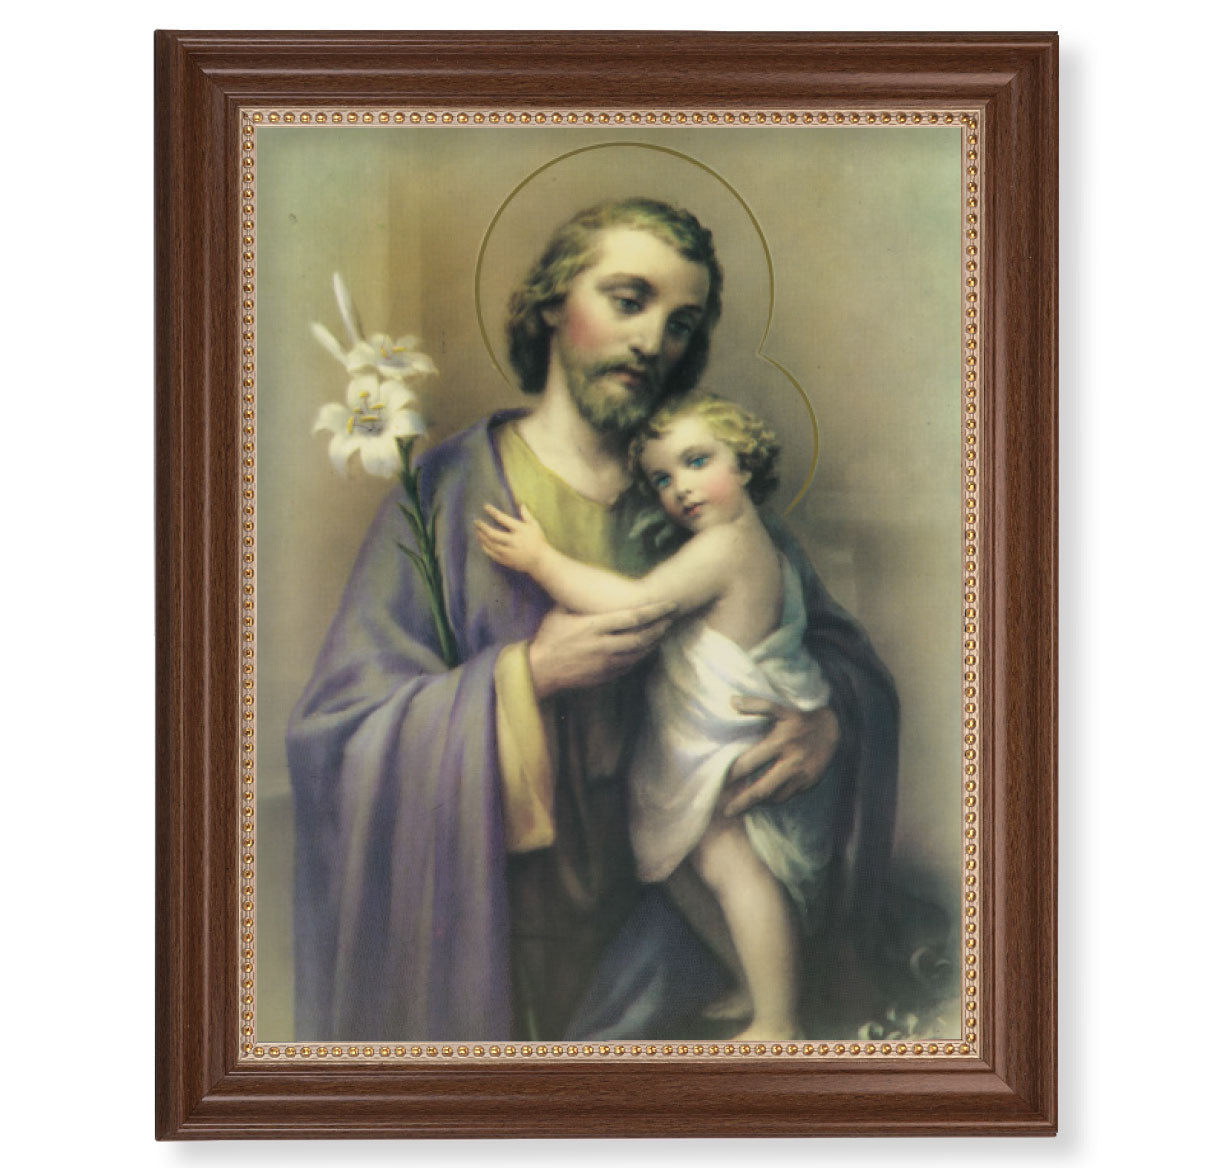 St. Joseph Picture Framed Wall Art Decor Extra Large, Classic Dark Walnut Finished Frame with Gold Beaded Lip